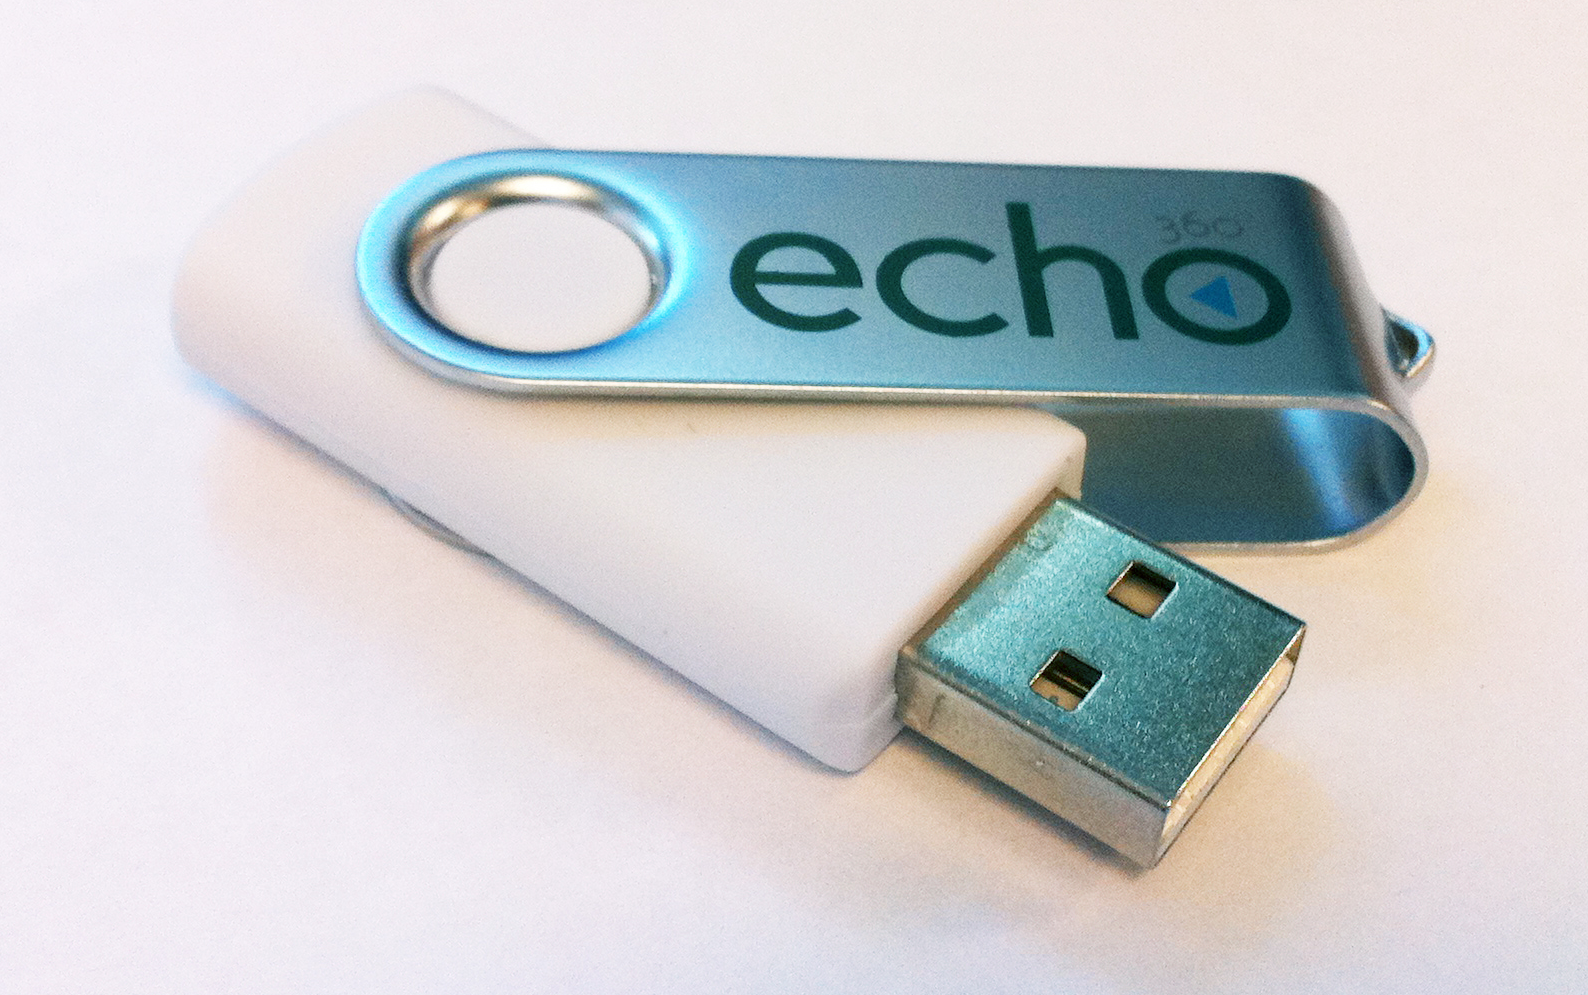 Picture of Echo360 USB drive.